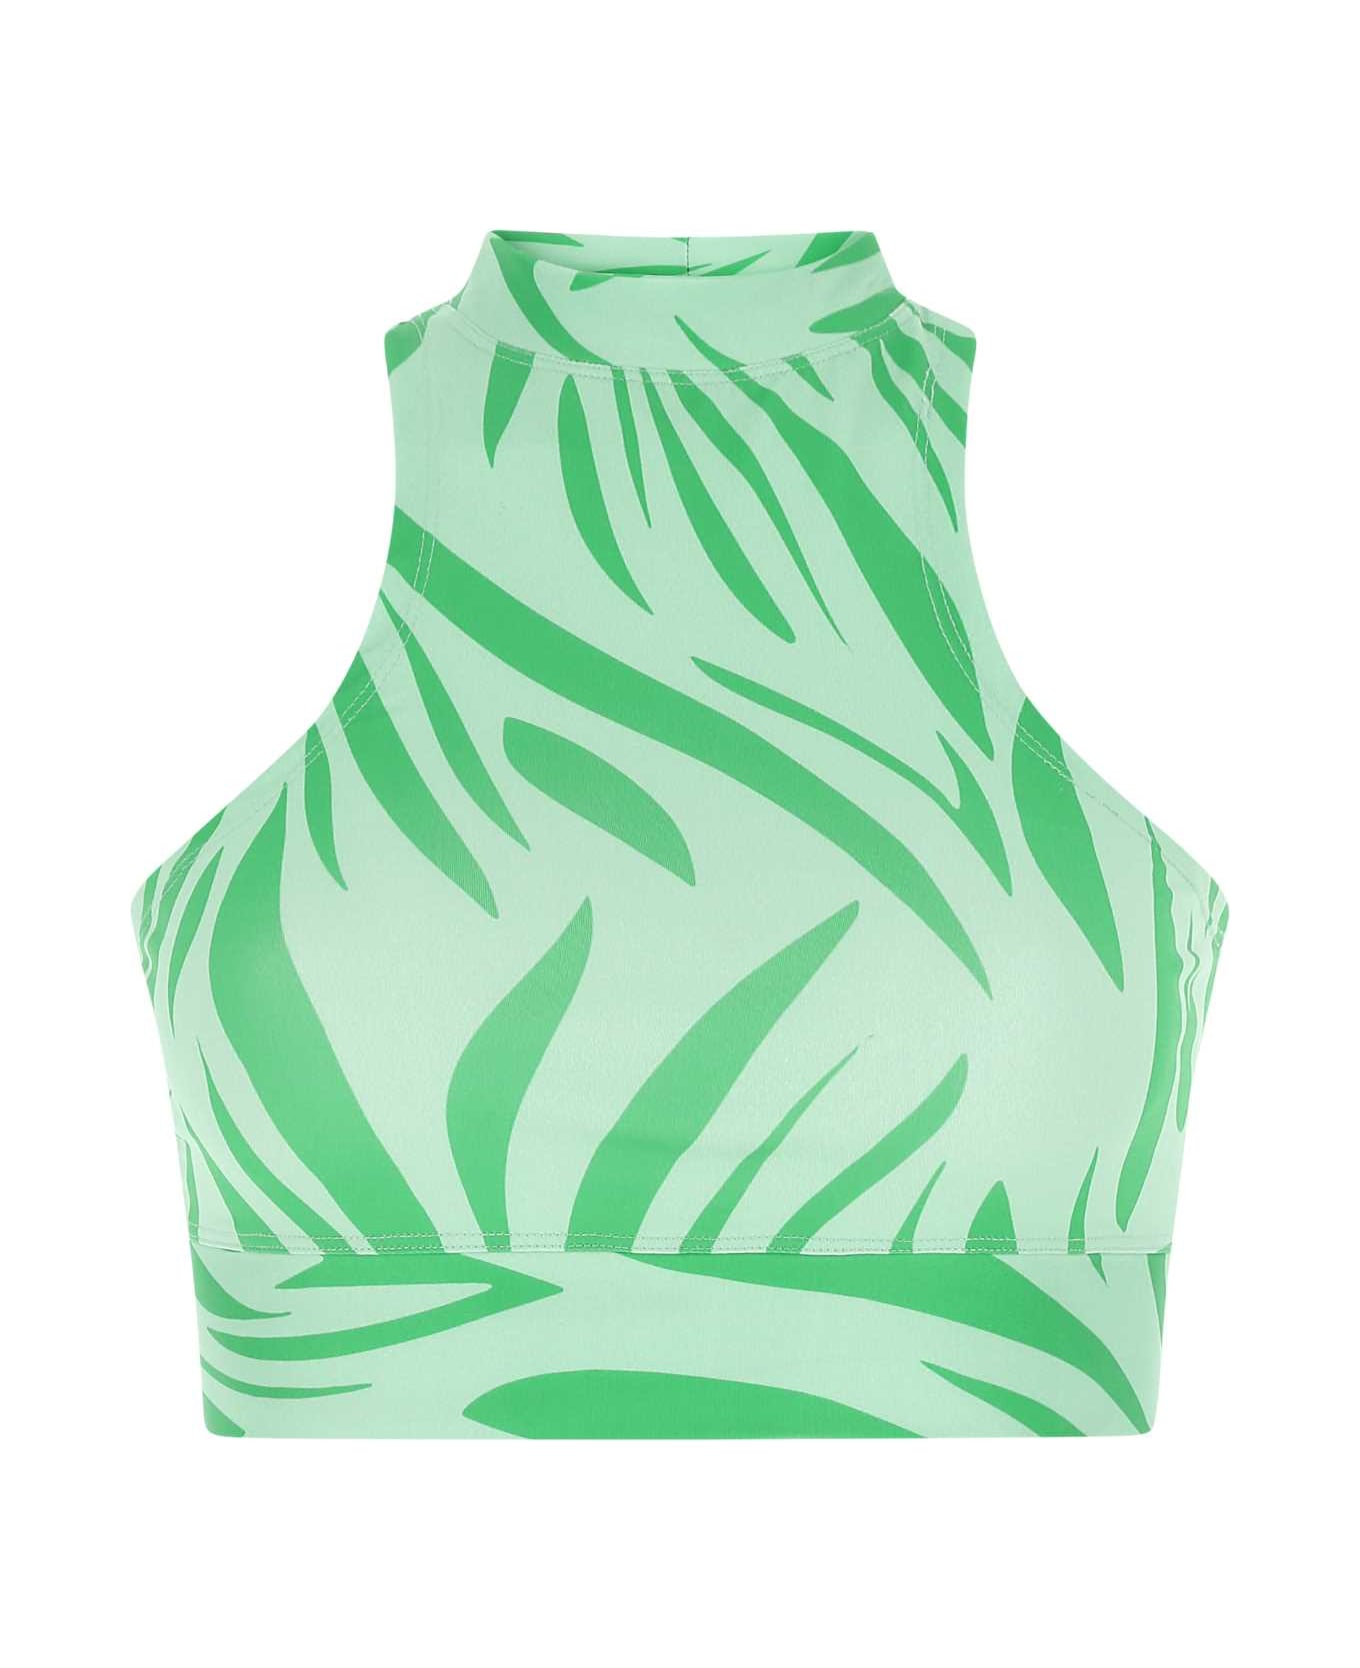 Dépendance Printed Stretch Polyester Top - GREEN